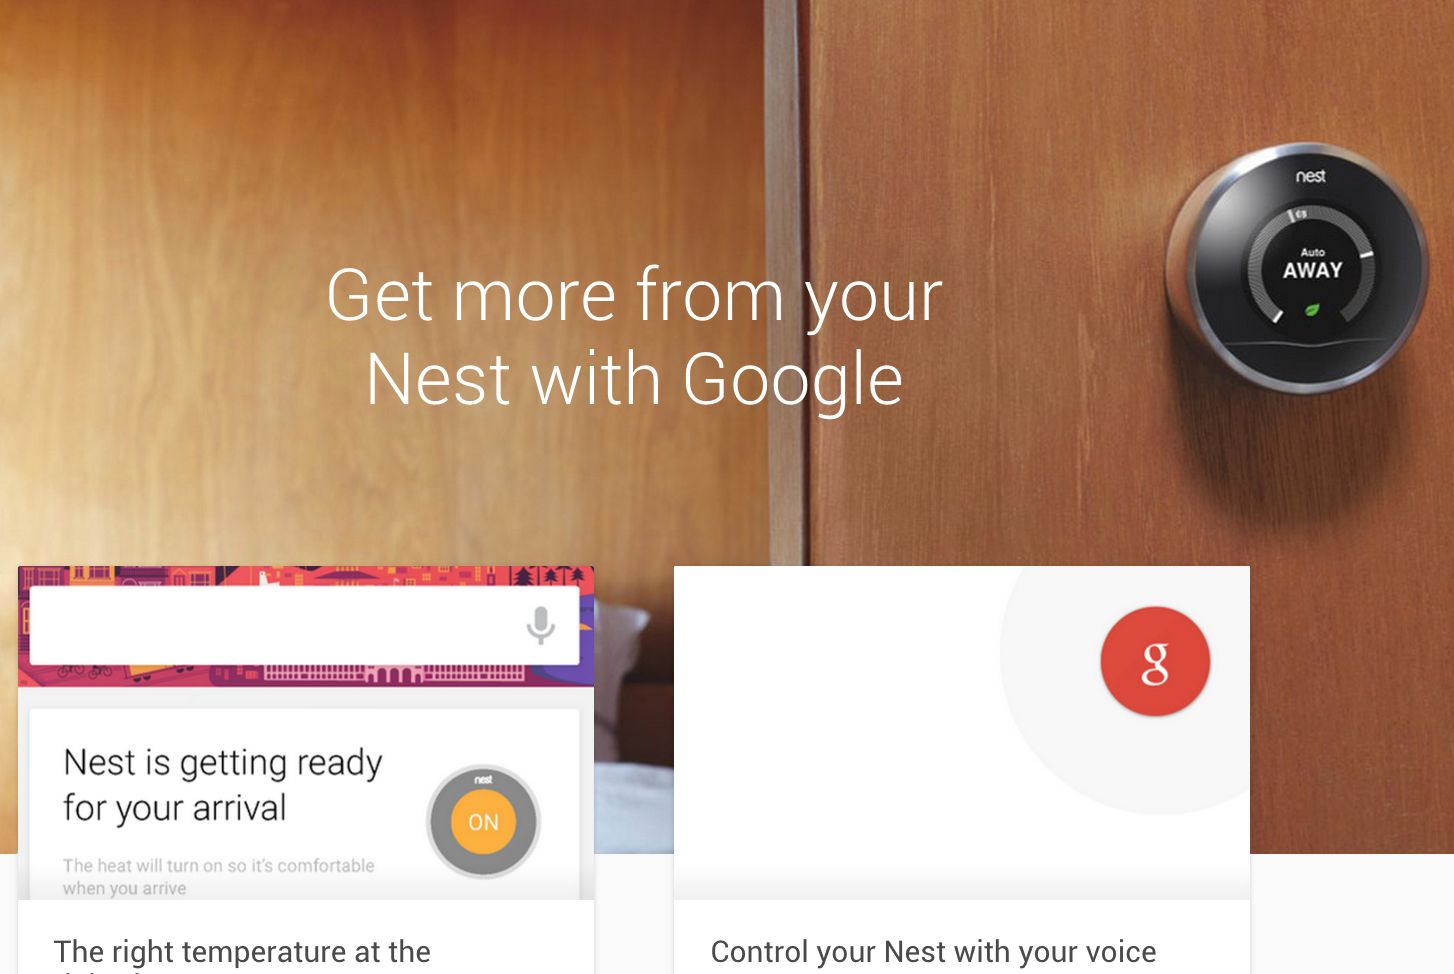 you can now control nest thermostat with your voice if you own an android phone image 3